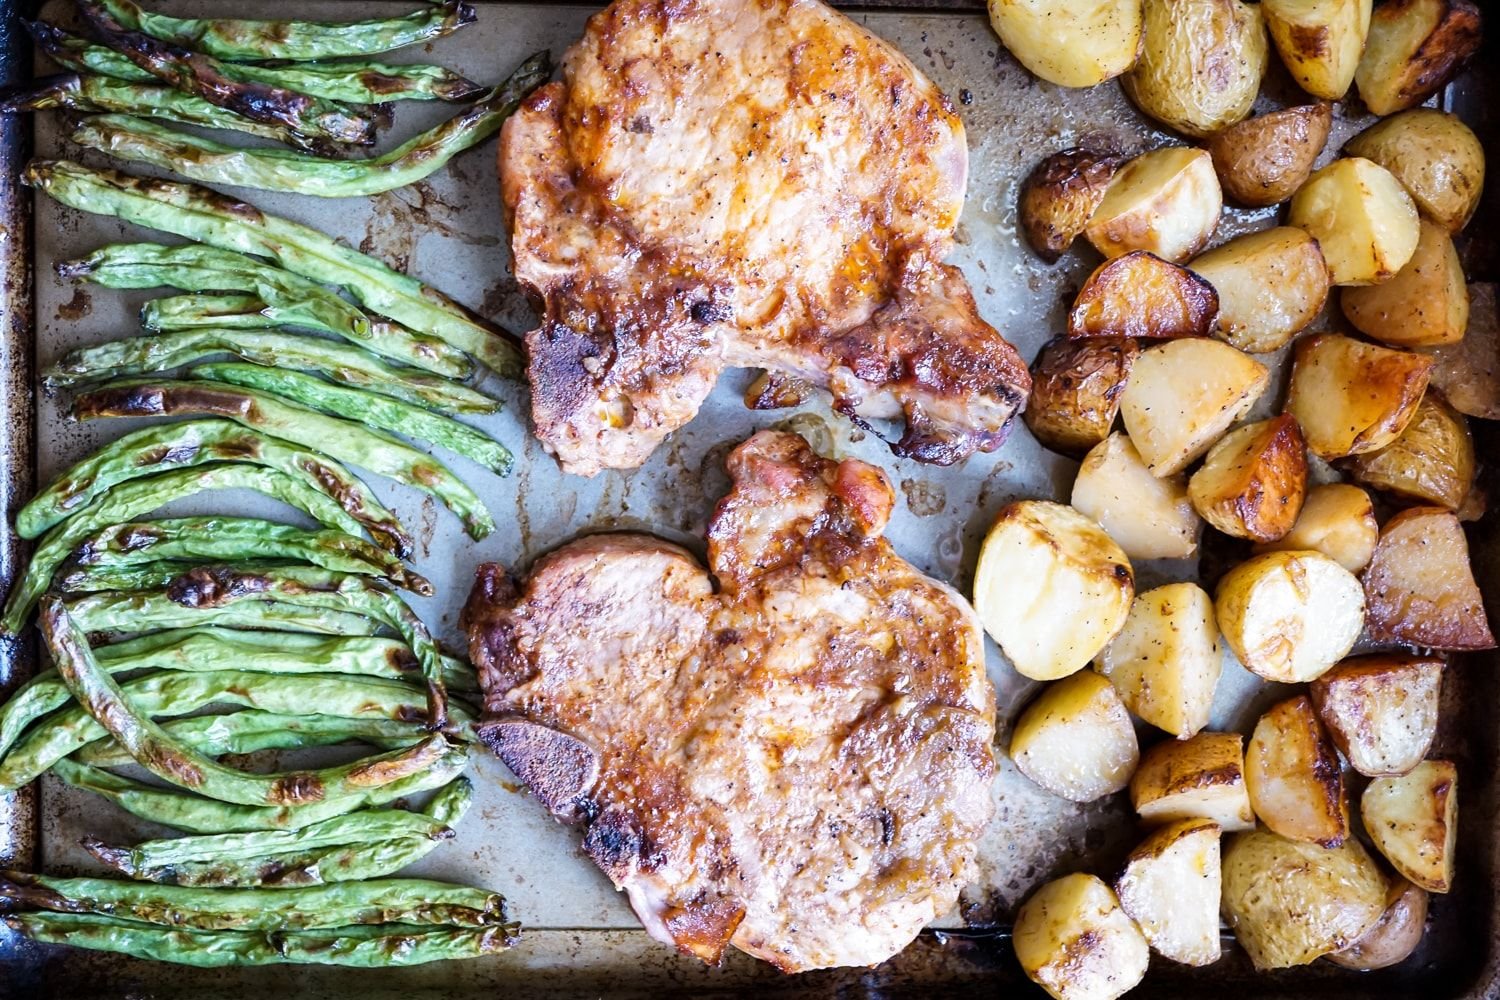 Sheet Pan Pork Chops, Potatoes, and Green Beans caramelized and ready to eat.